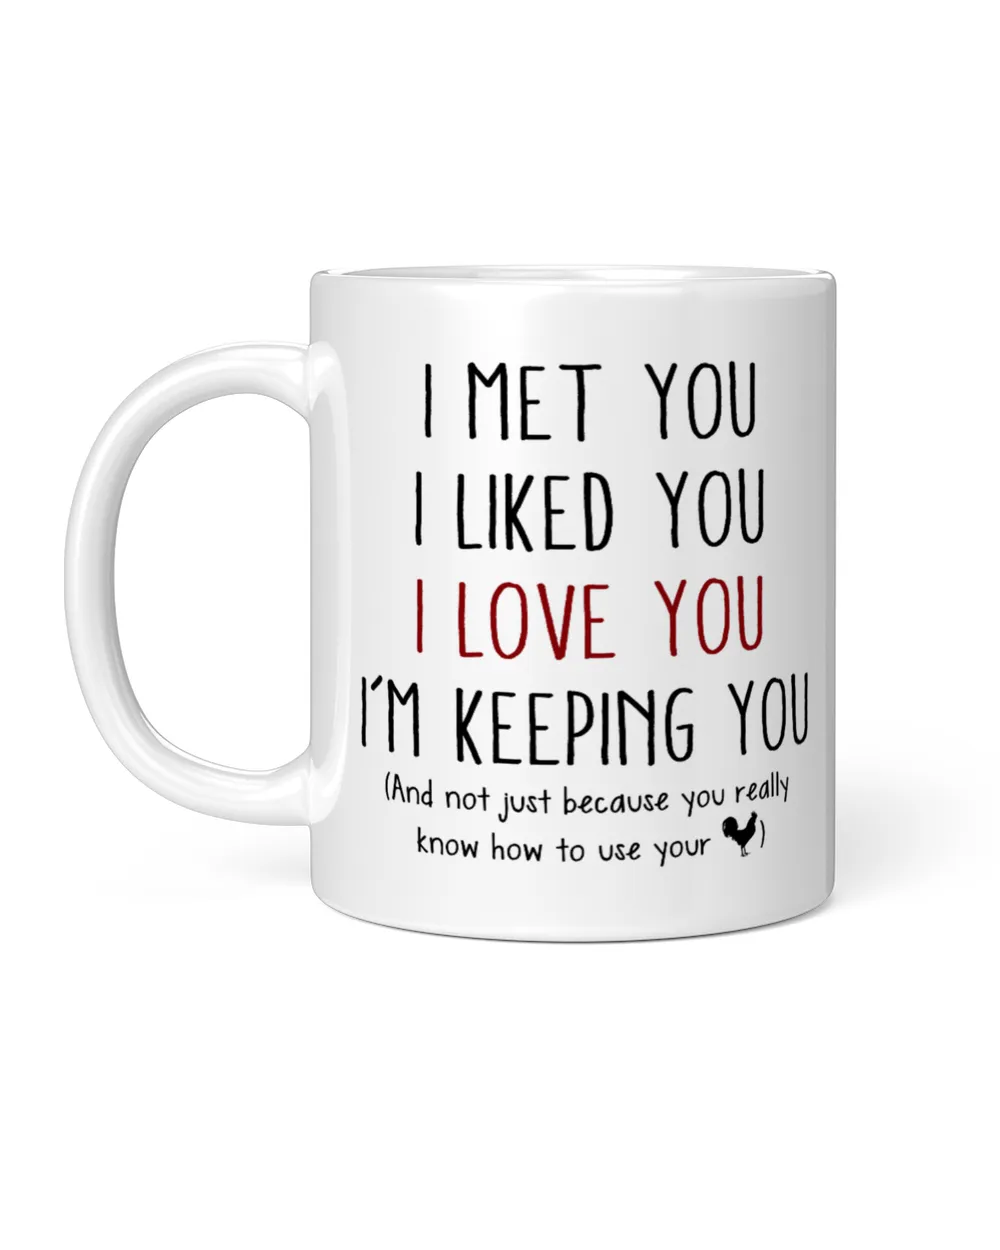 I met you I liked you I love you I'm keeping you And not just because you really know how to use your cock coffee mug